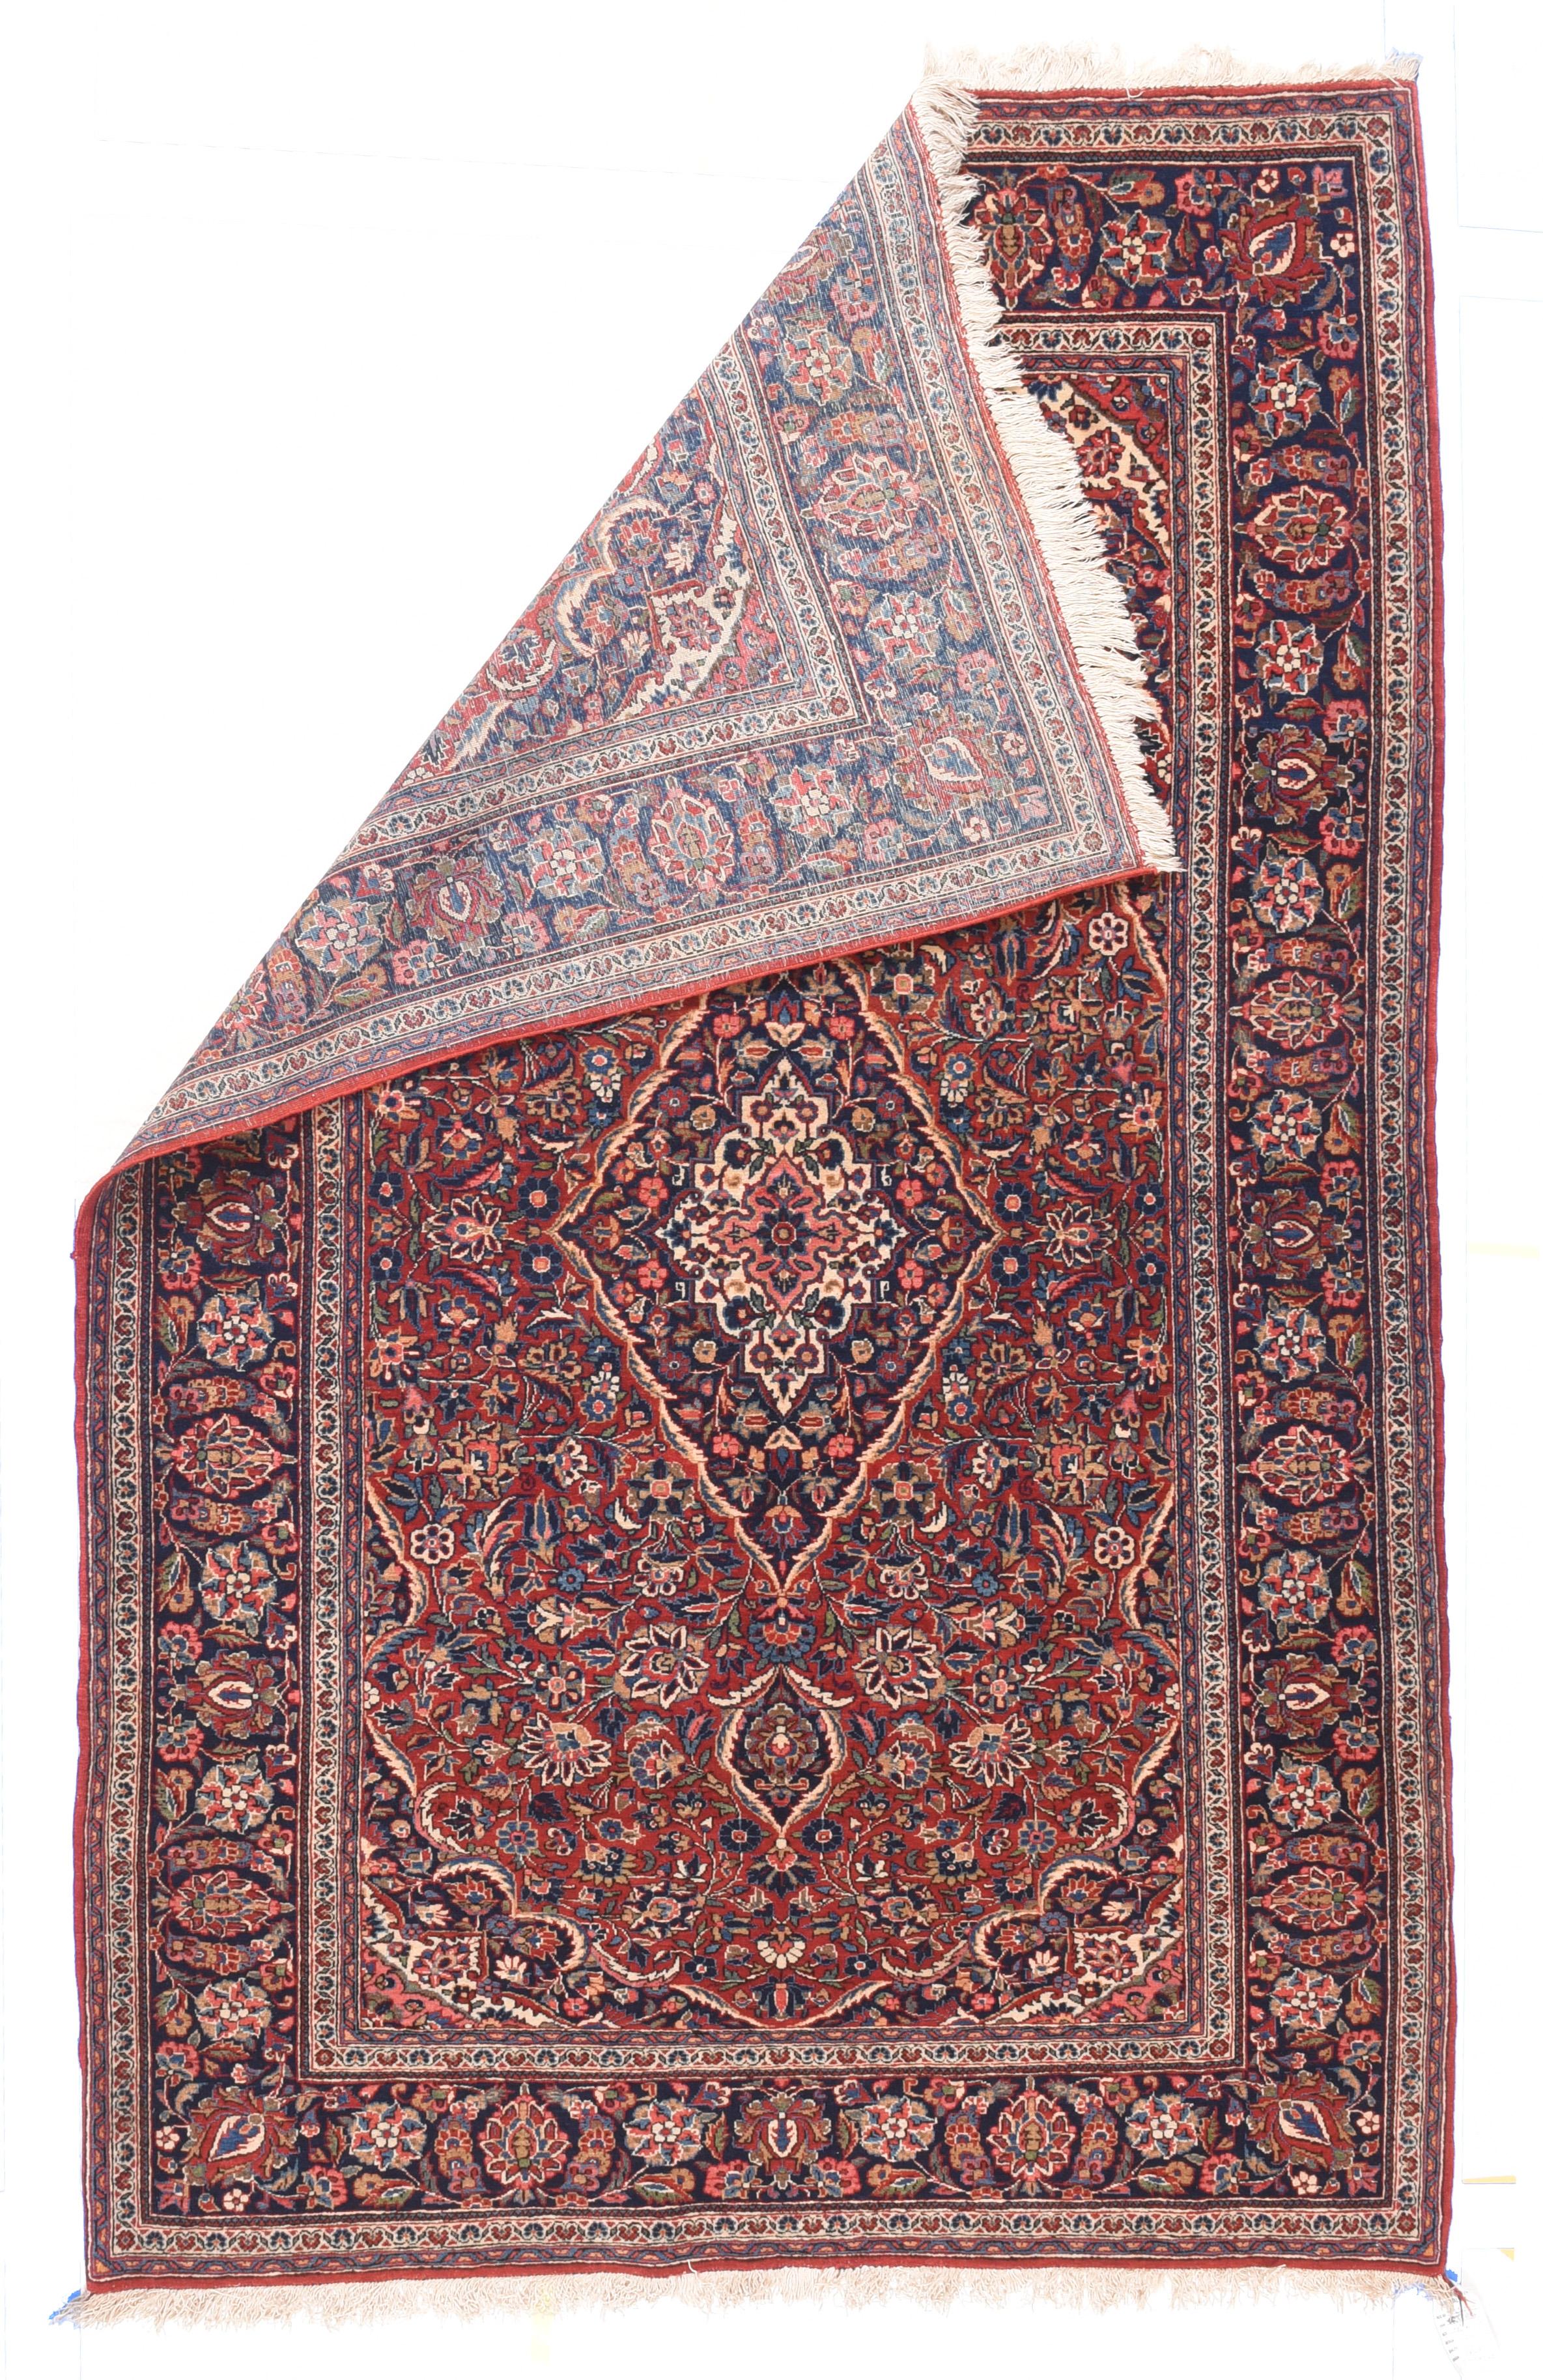 Antique Persian Kashan Rug 4'4'' x 7'2''. This is an absolutely iconic Interwar Period Kashan scatter from central Persia with a red/navy/cream palette expressed in a tall, lozenge medallion, swirling arabesques with petal palmettes, and a navy